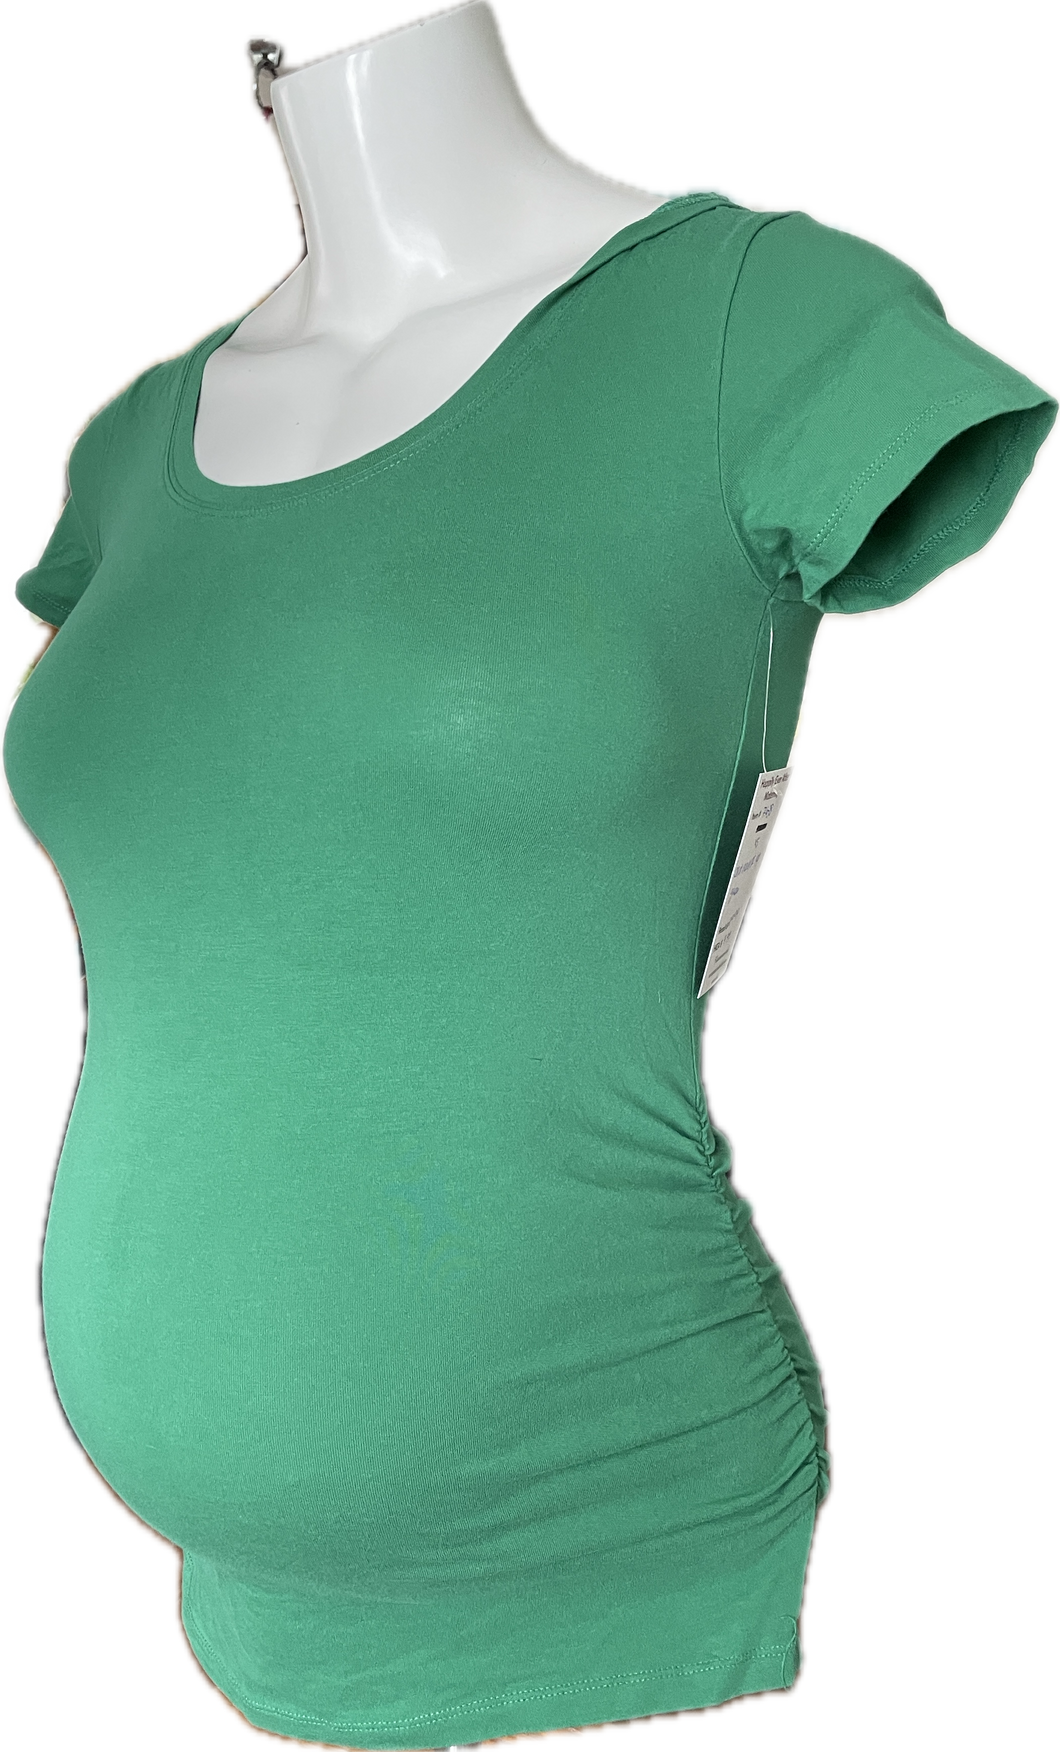 XS Old Navy Maternity Short Sleeve top in Green